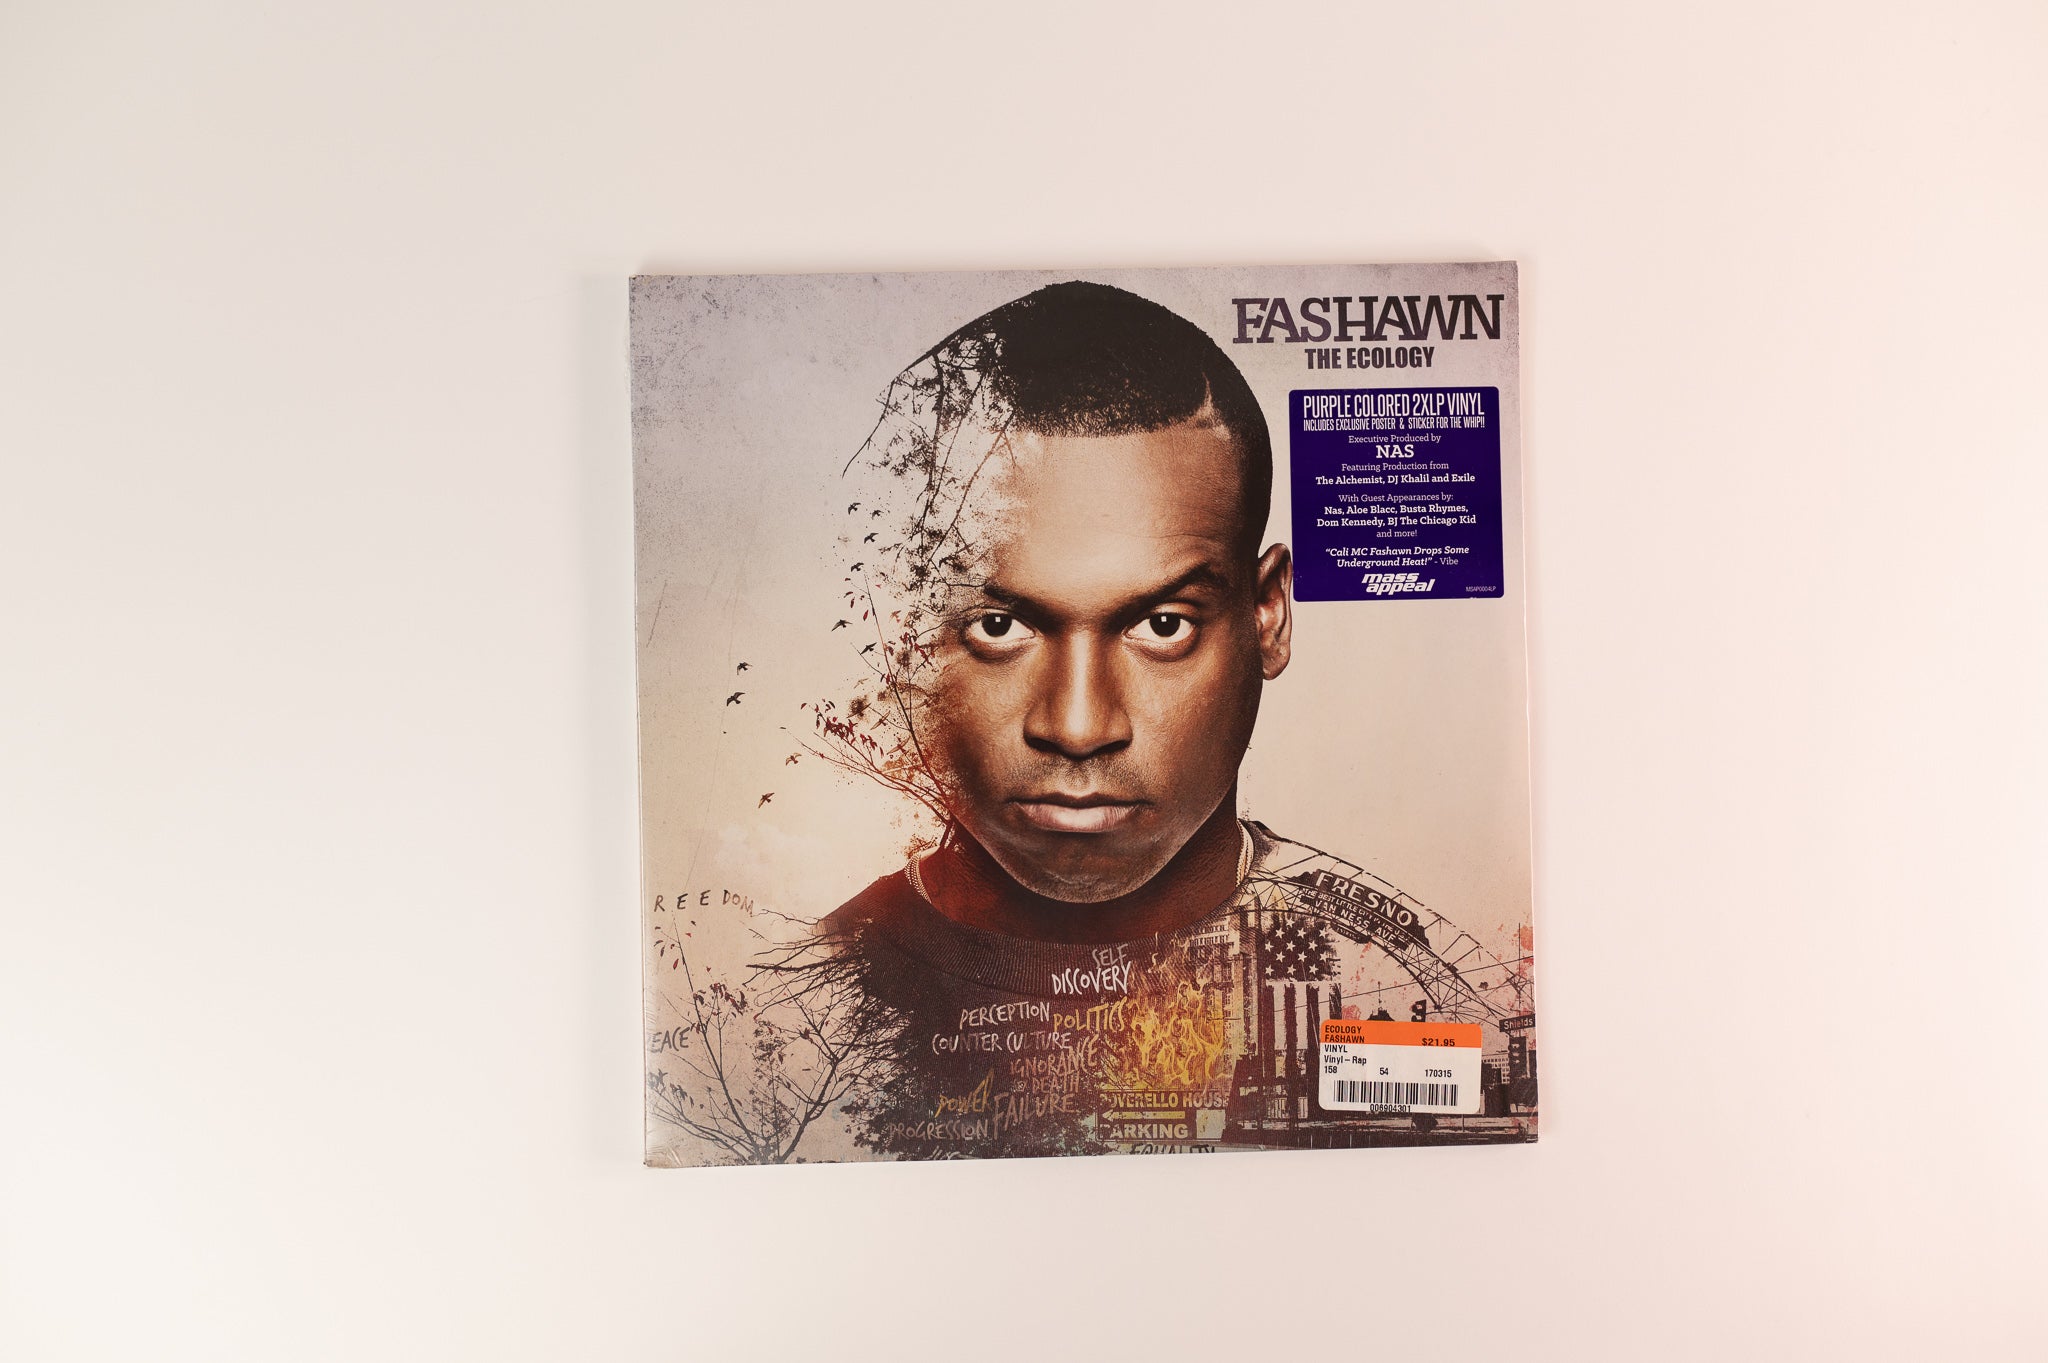 Fashawn - The Ecology on Mass Appeal Purple Vinyl Sealed